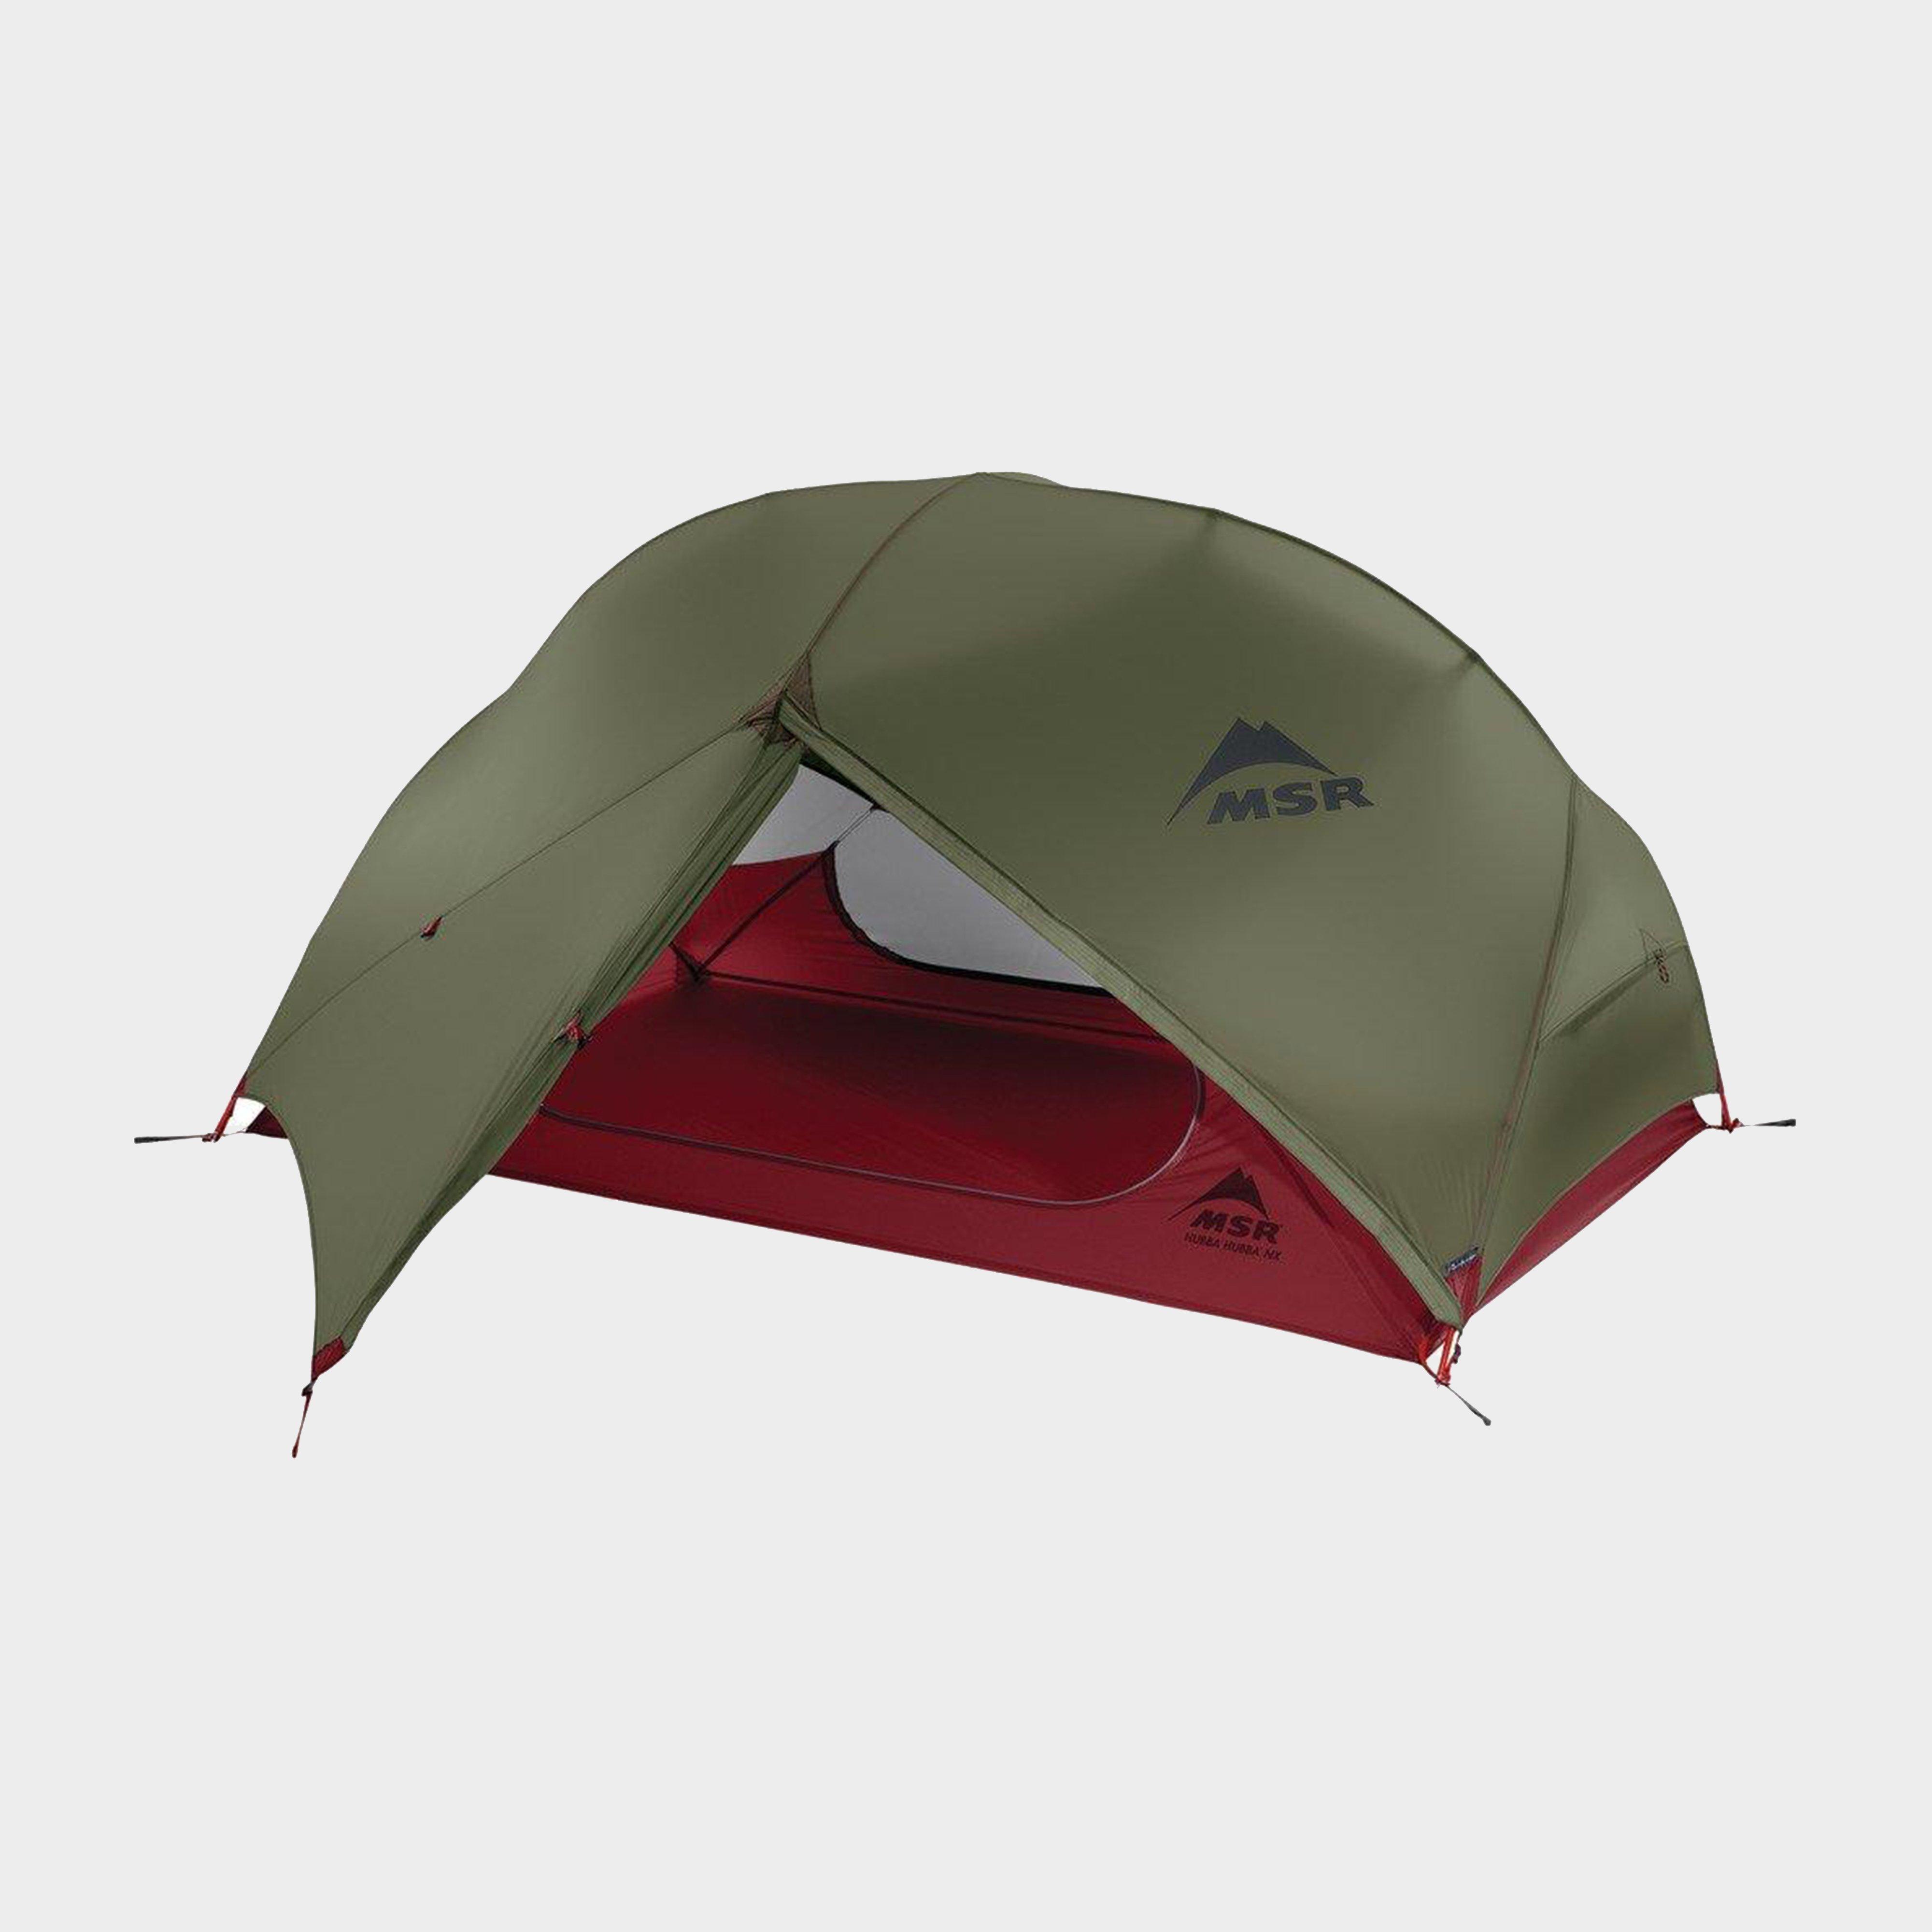  MSR Hubba Hubba NX 2-Person Backpacking Tent, Green